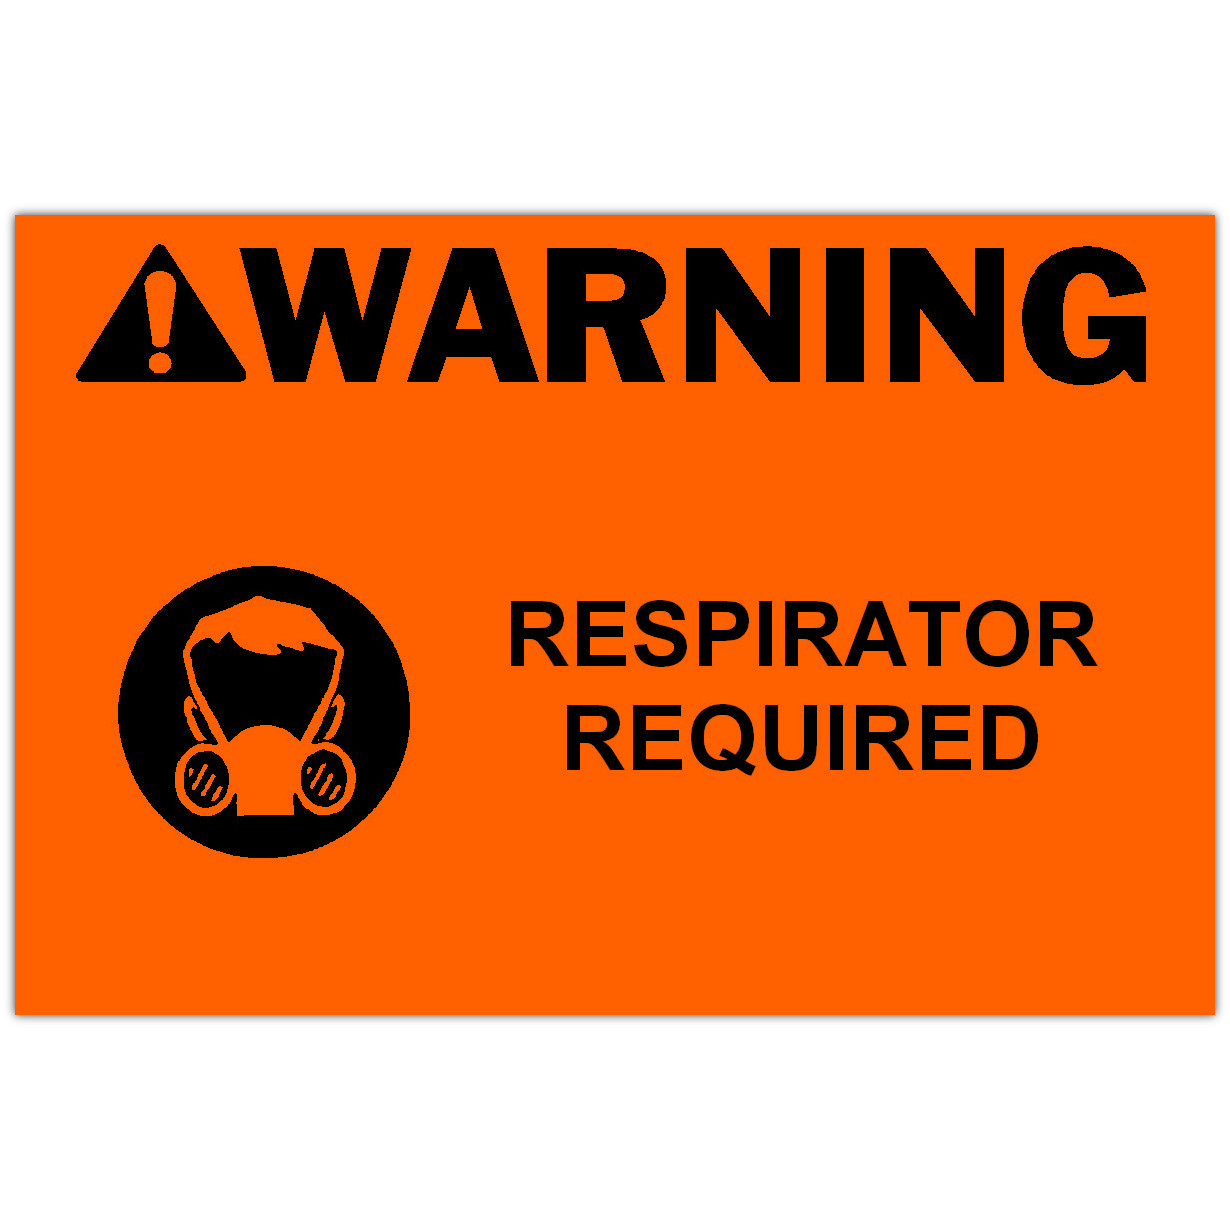 4in x 6in WARNING Respirator Required Safety Label